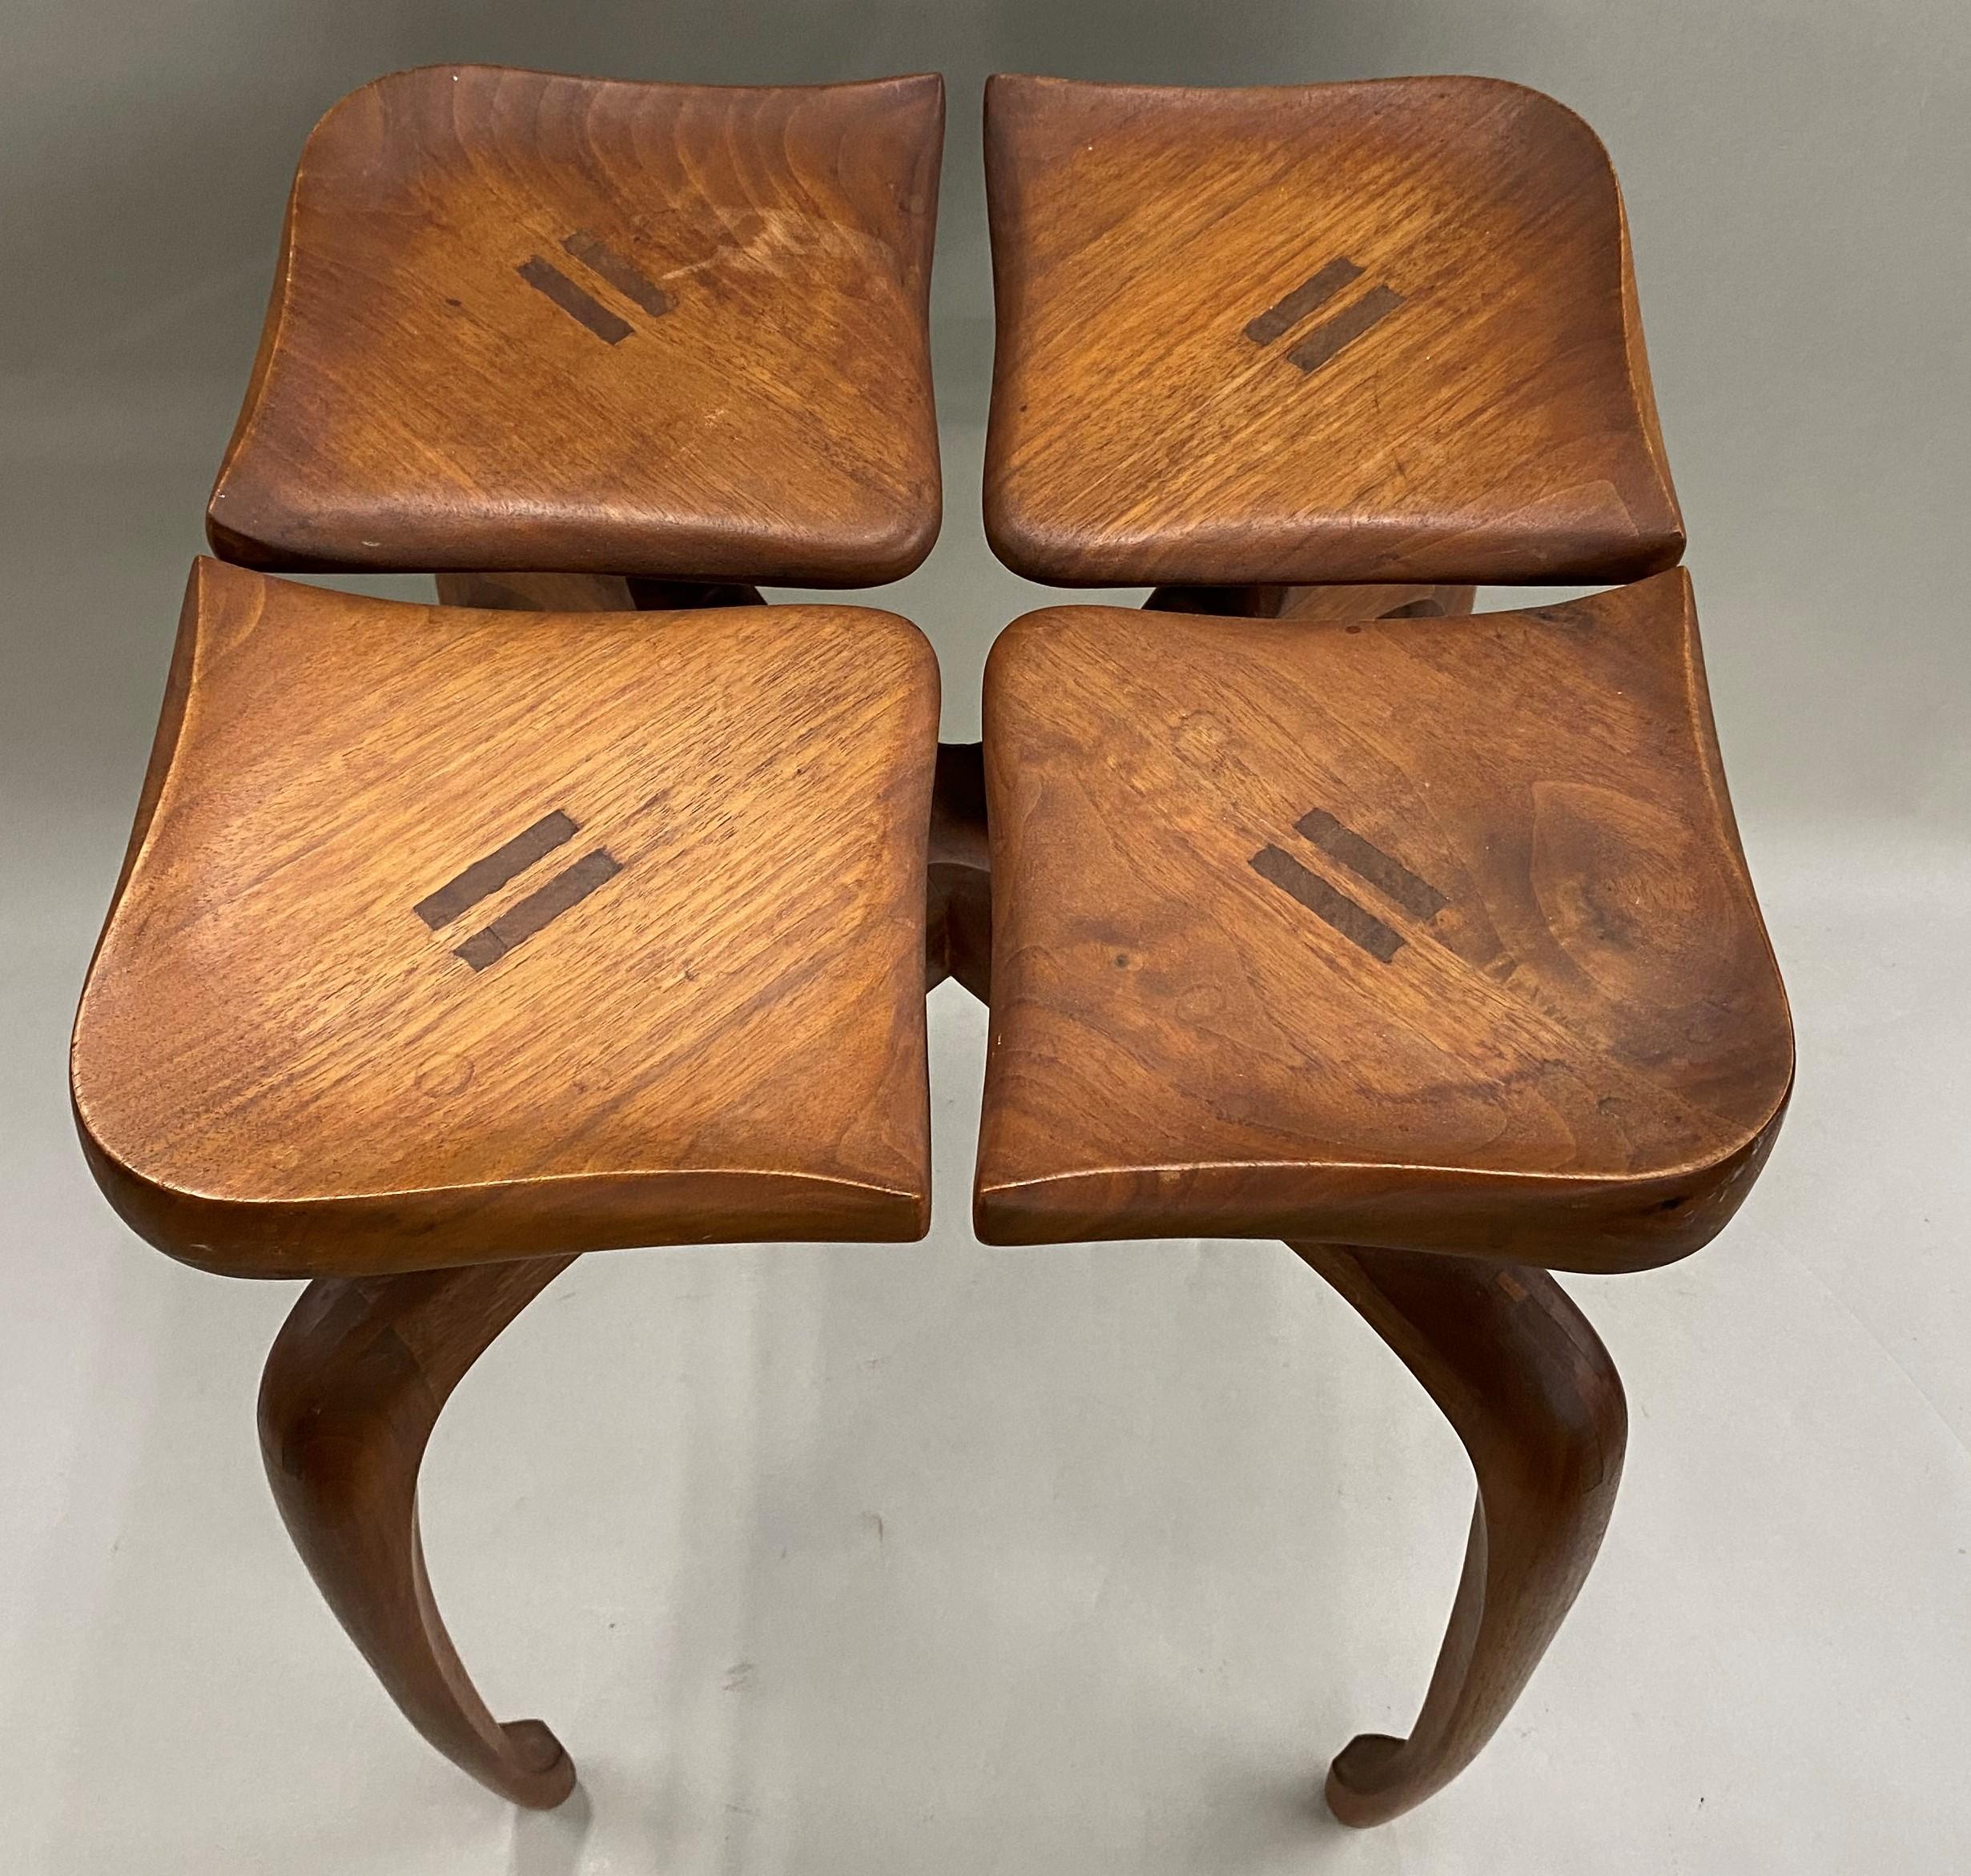 An interesting hand carved modernist low table with four separated petals, each on their own stem, forming a square top, with curled edges on the leaves, supported by four shaped legs. The maker carved their initials on the underside “BN 72”. Very